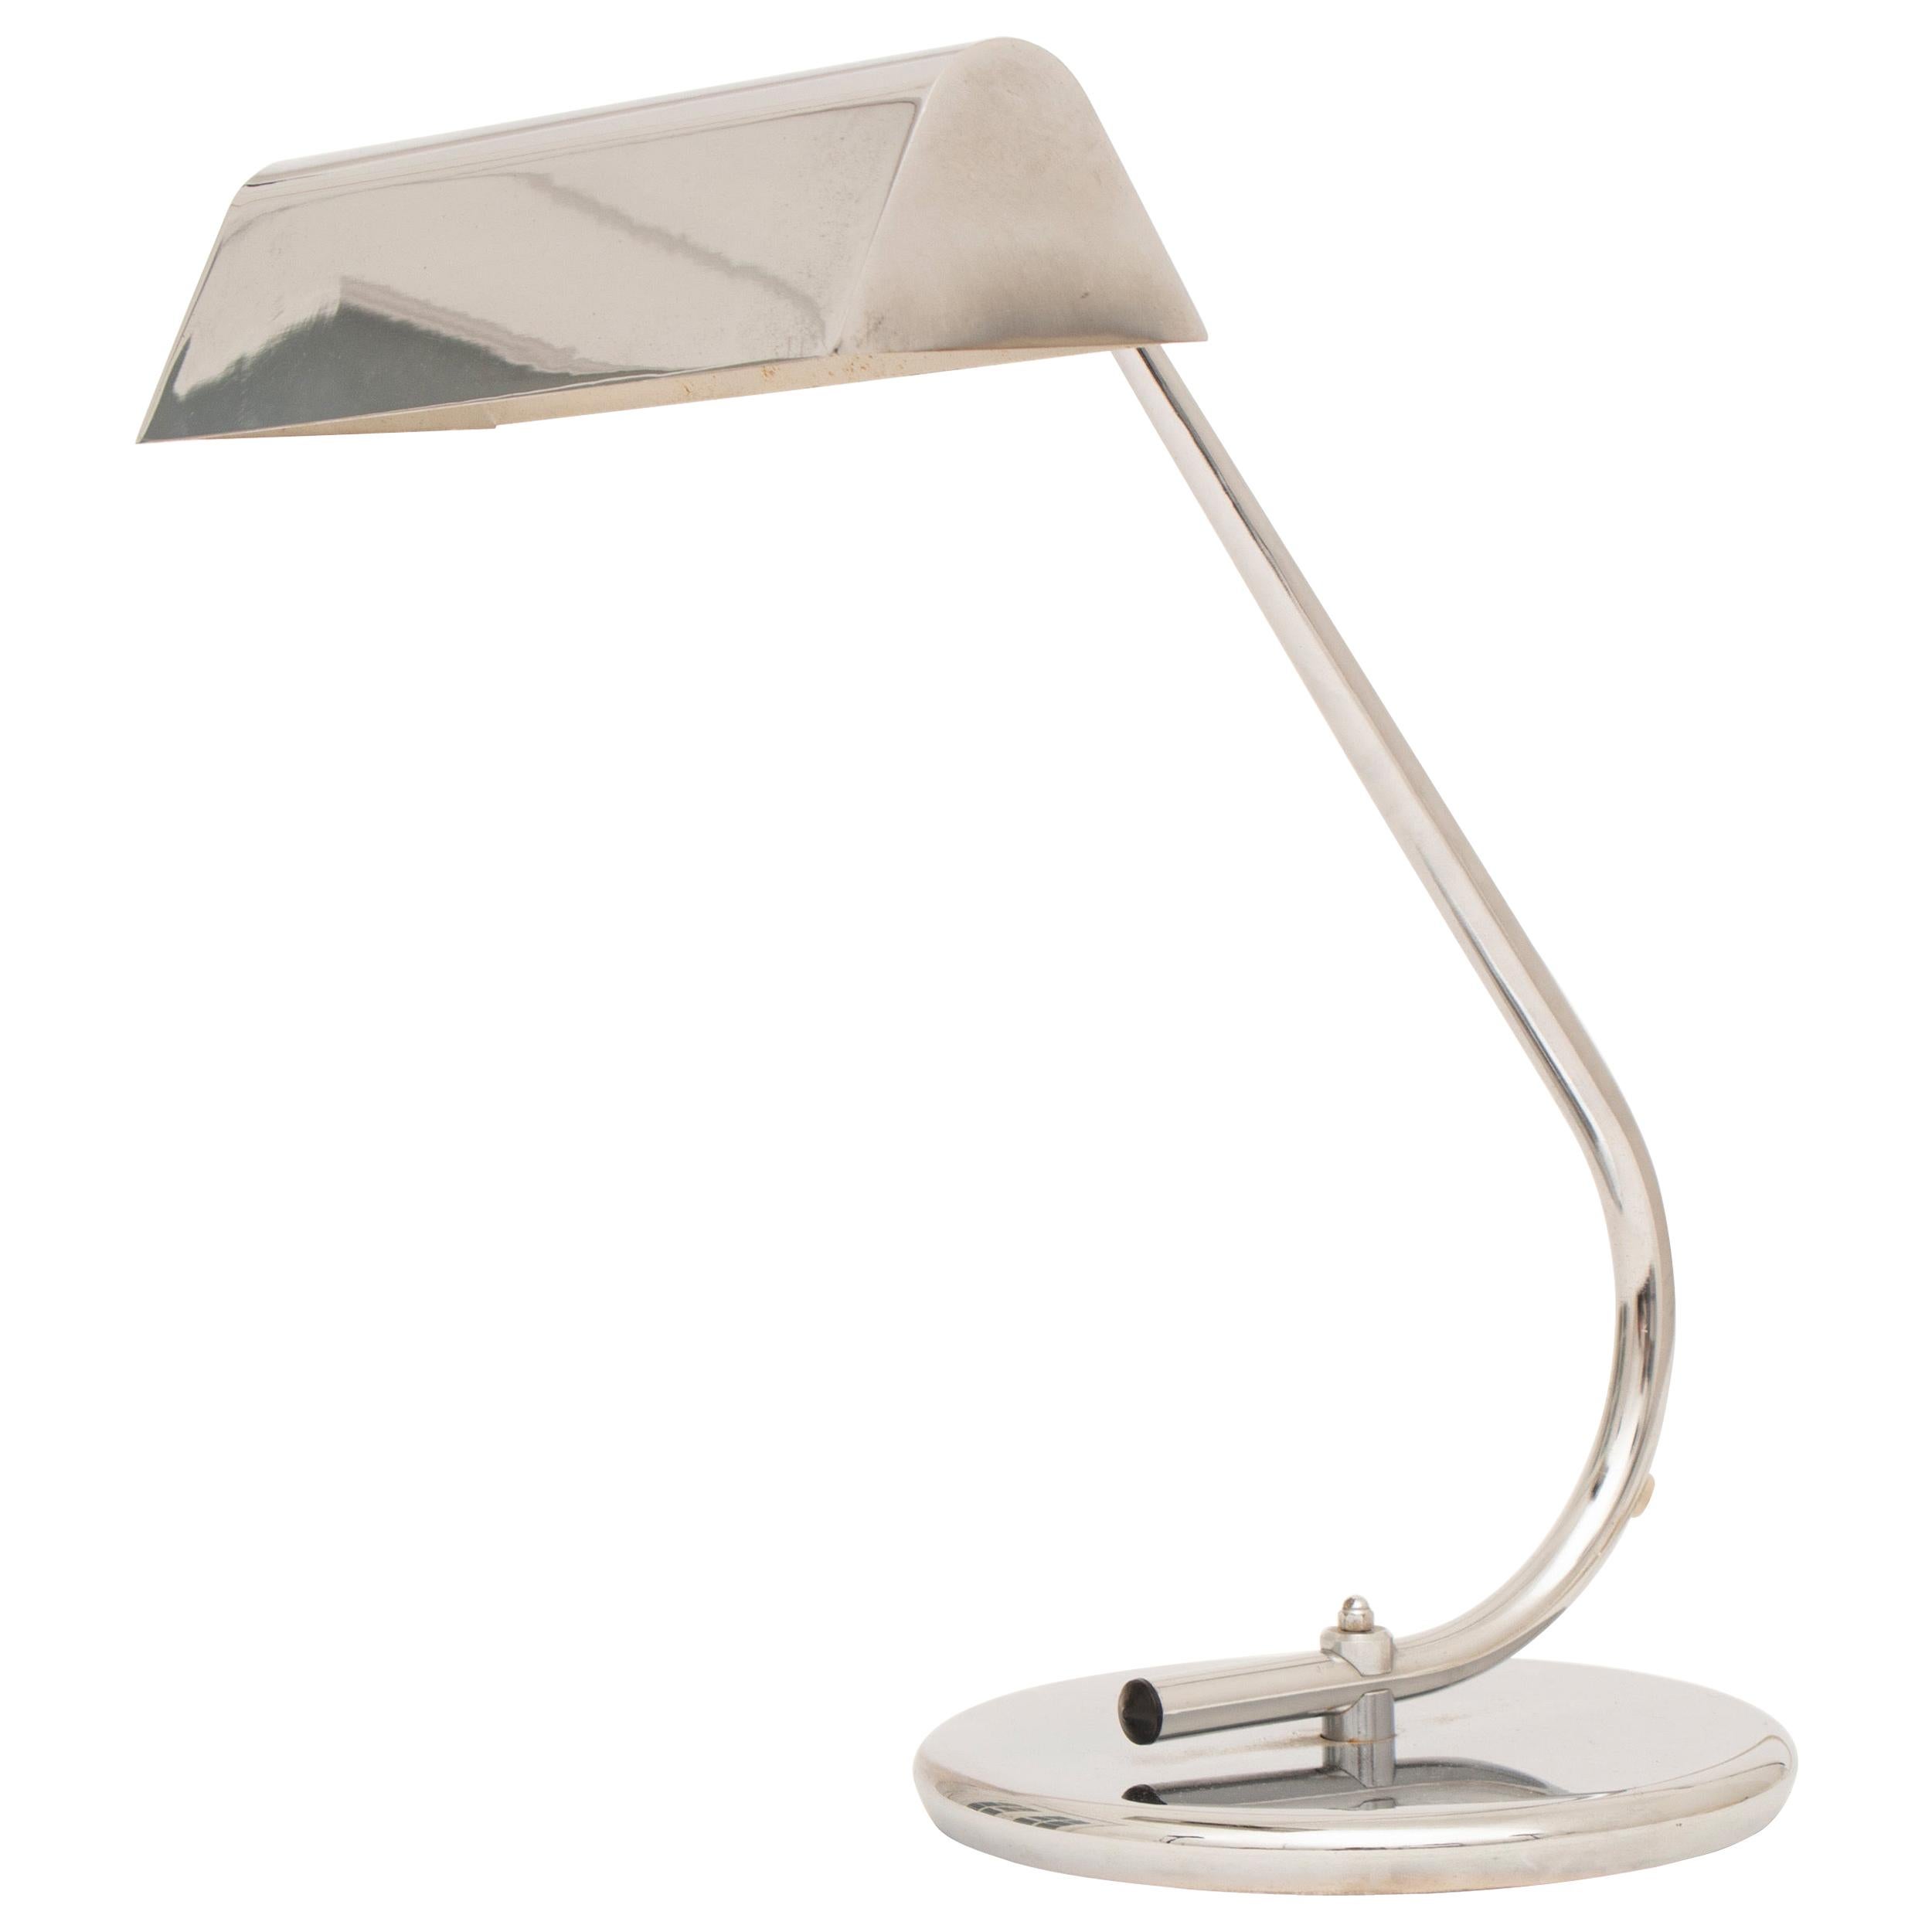 Italian Midcentury Chrome Desk Lamp with Pivoting Reflector For Sale